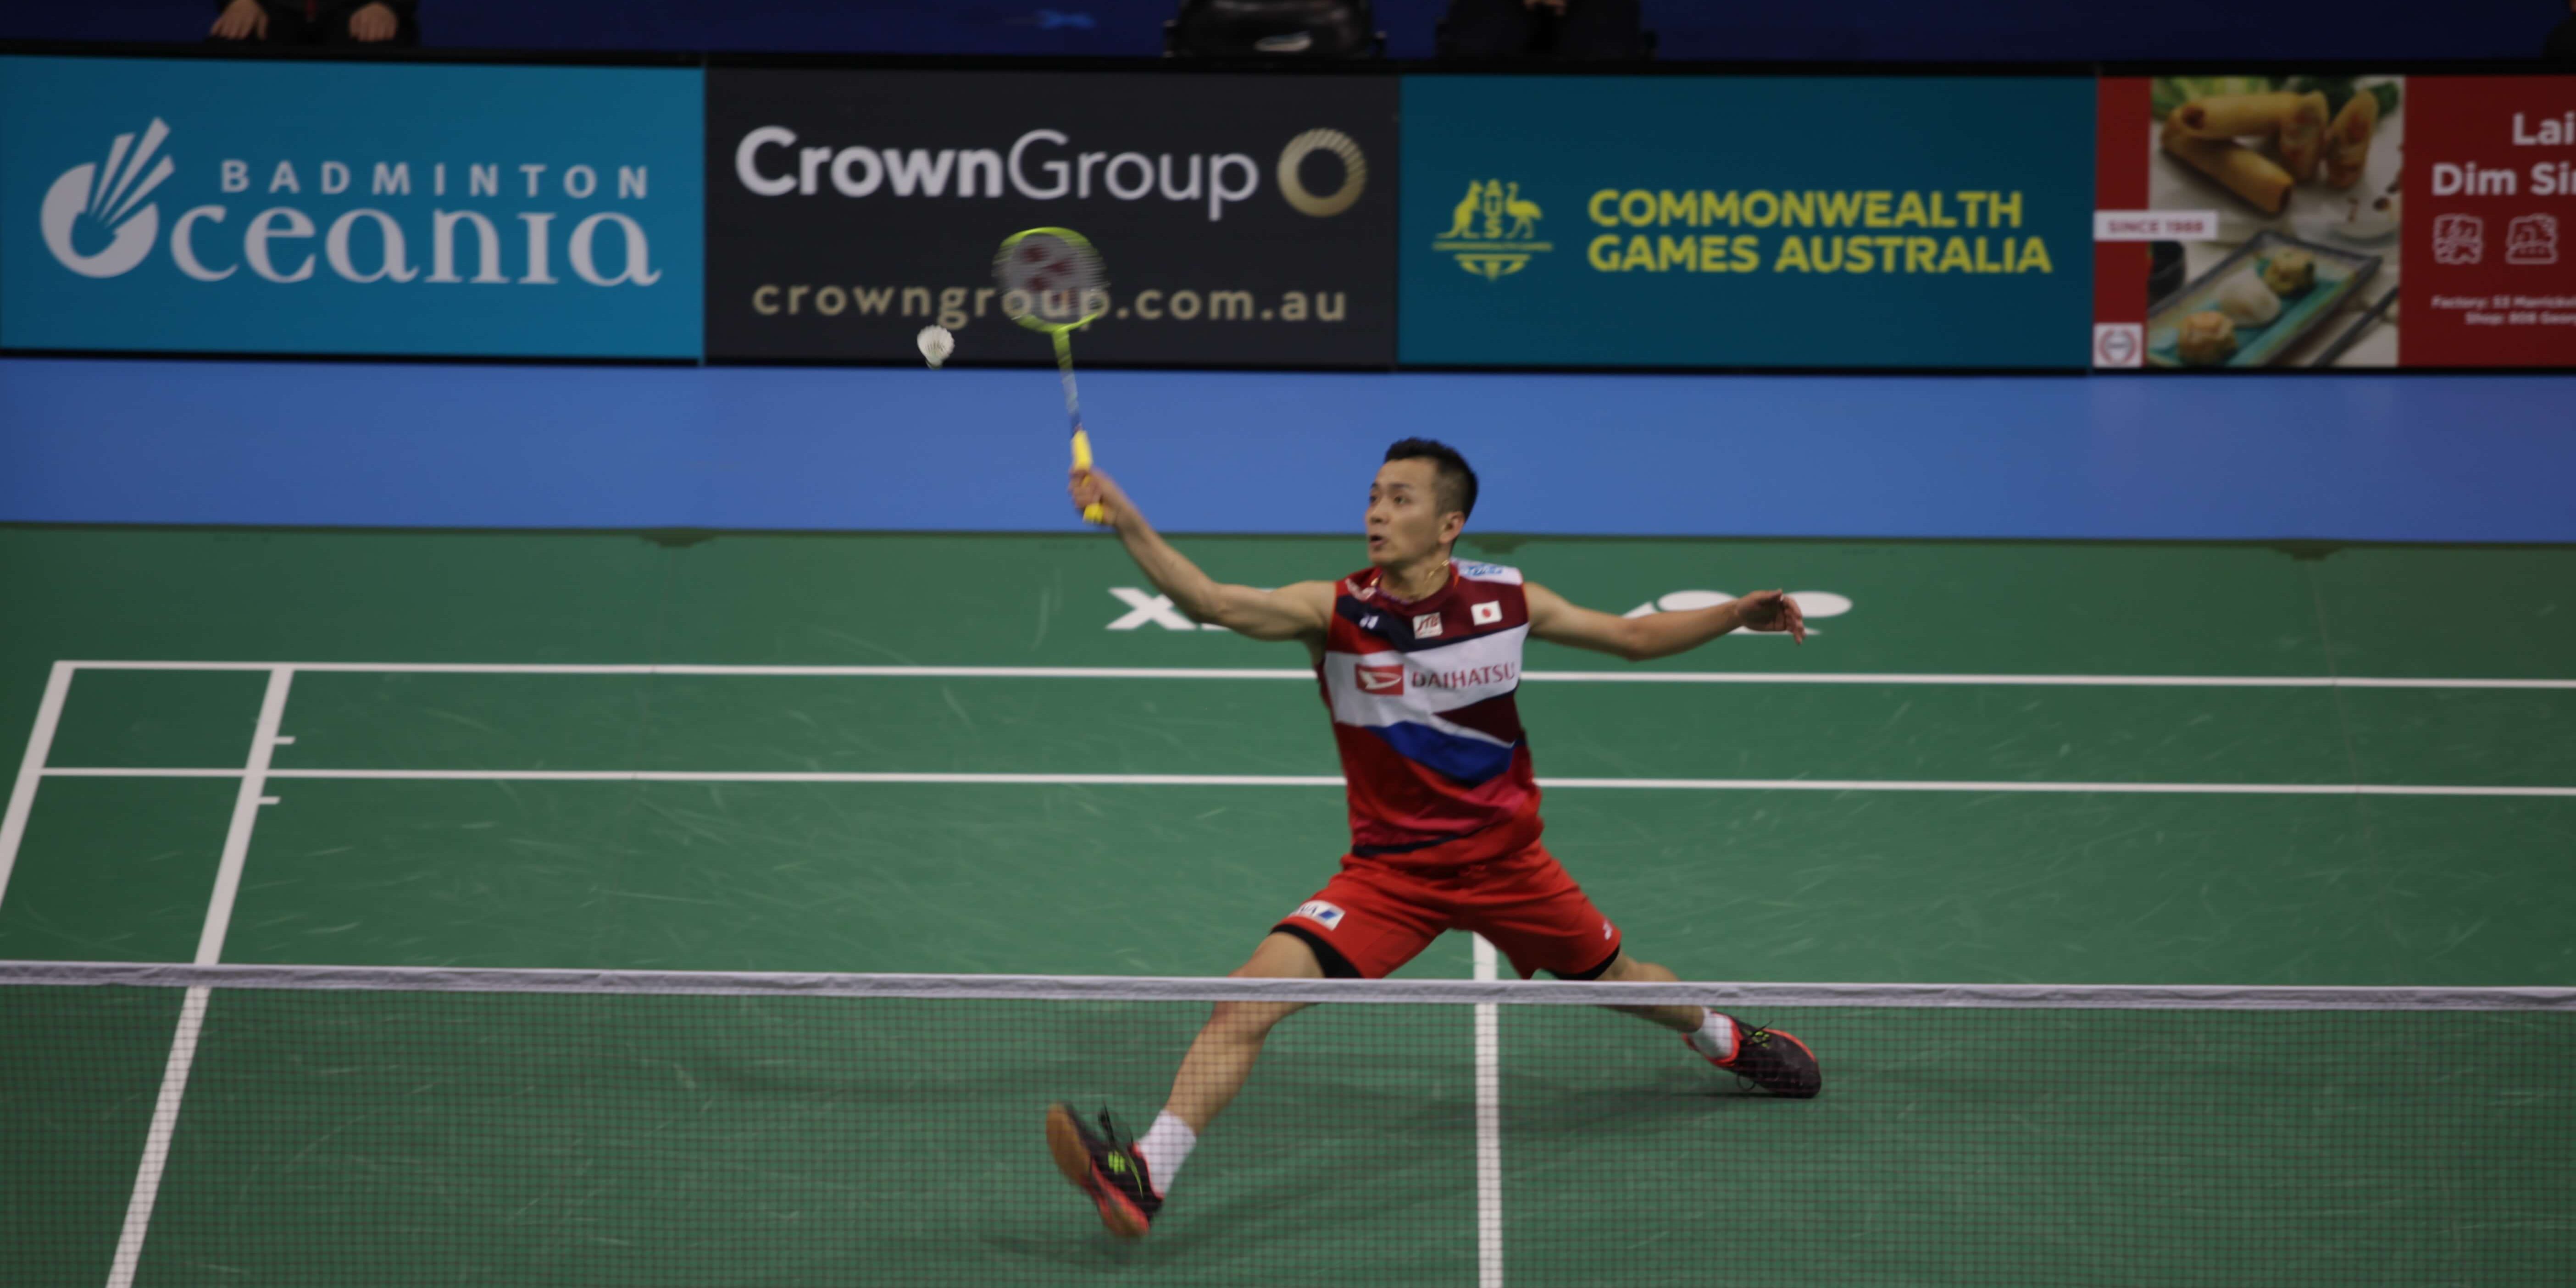 Fourth seed Kenta Nishimoto knocked out in first round – Aus Open 19